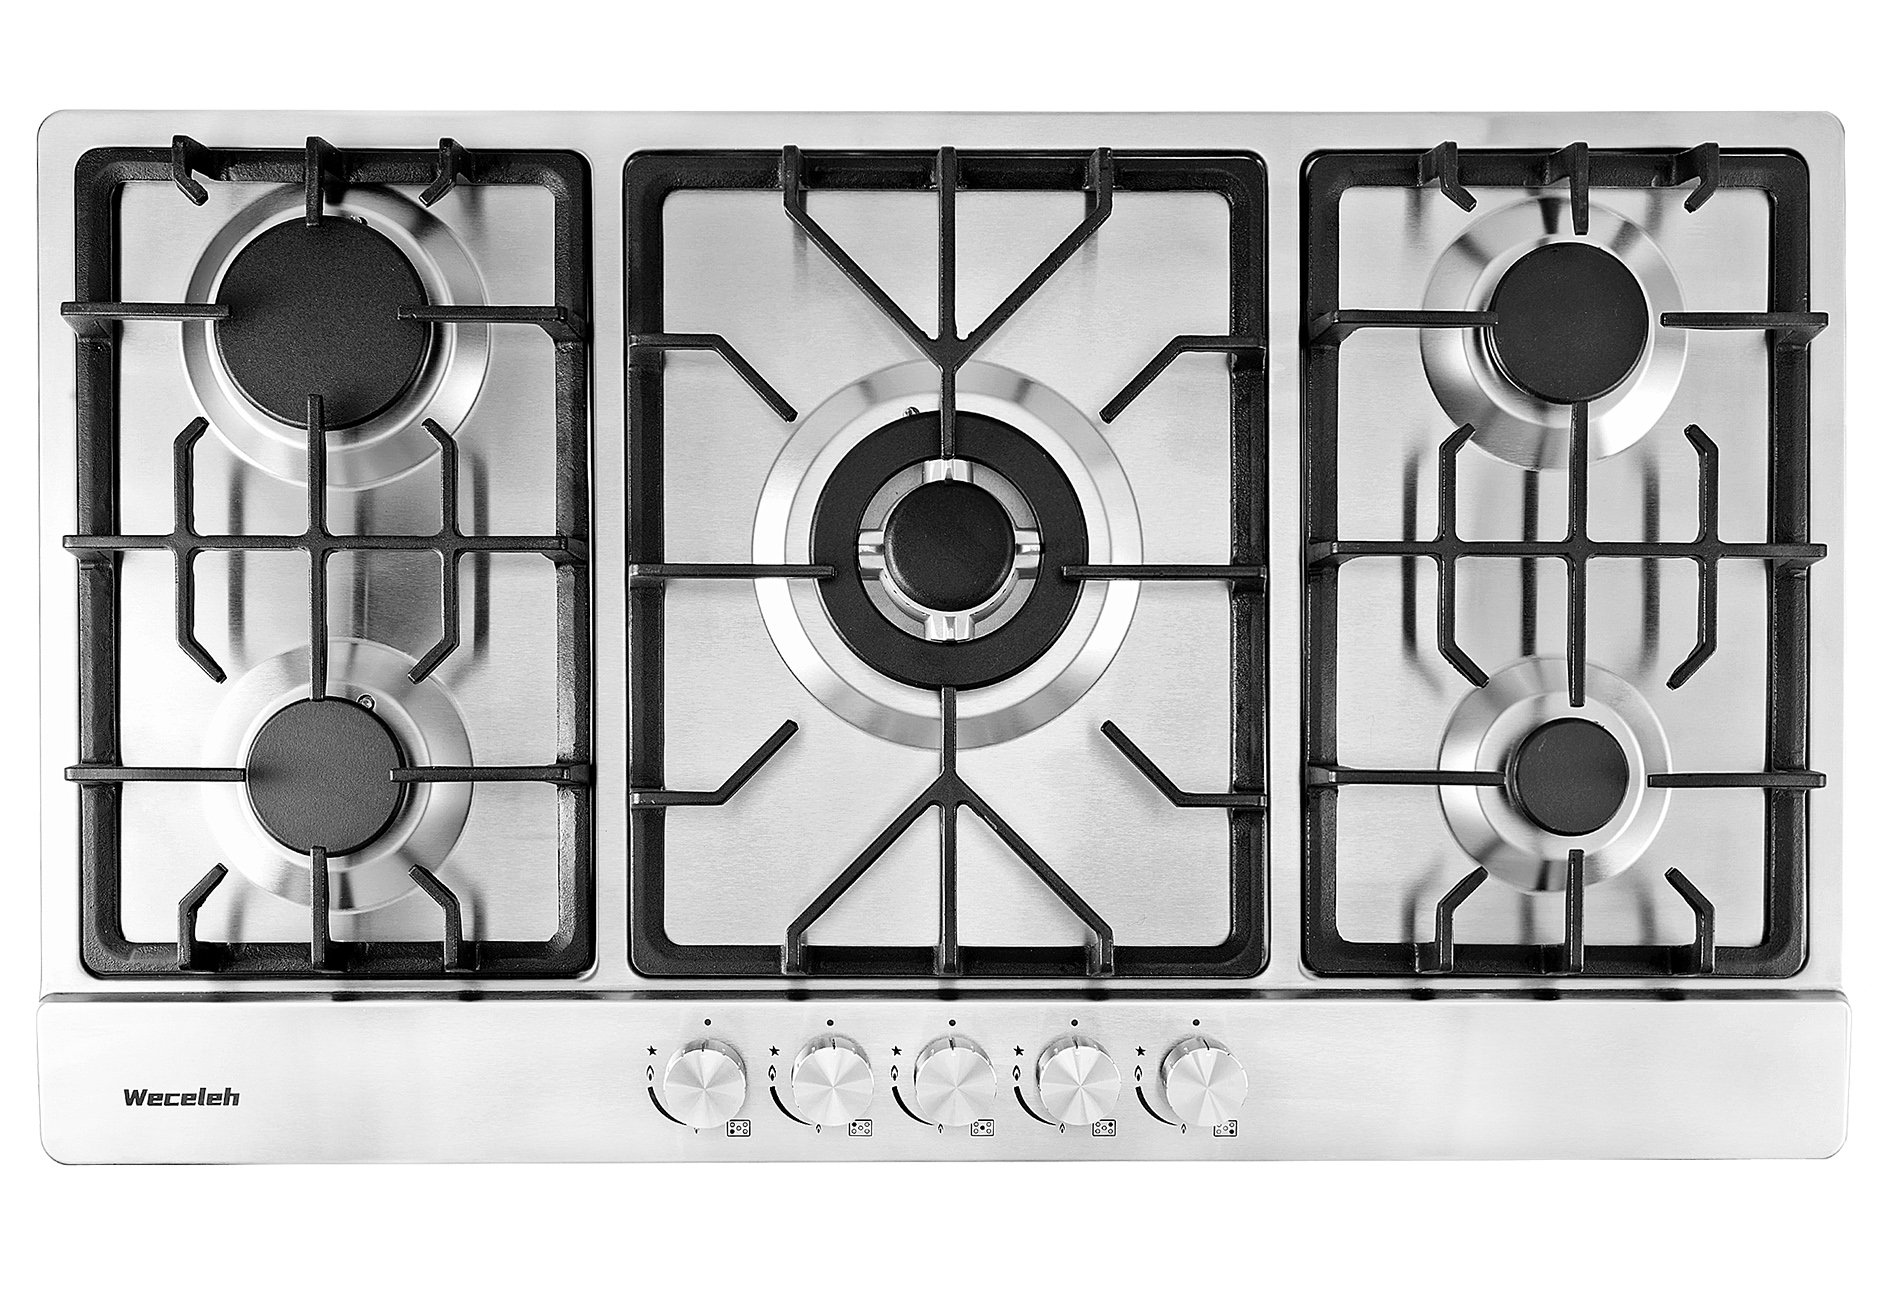  3 Burners Gas Stove Gas Cooktop, Stainless Steel Built-in Gas  Hob Cooktops, Gas Countertop for Home Kitchen Apartments, Thermocouple  Protection, Easy to Clean, Silver : Appliances